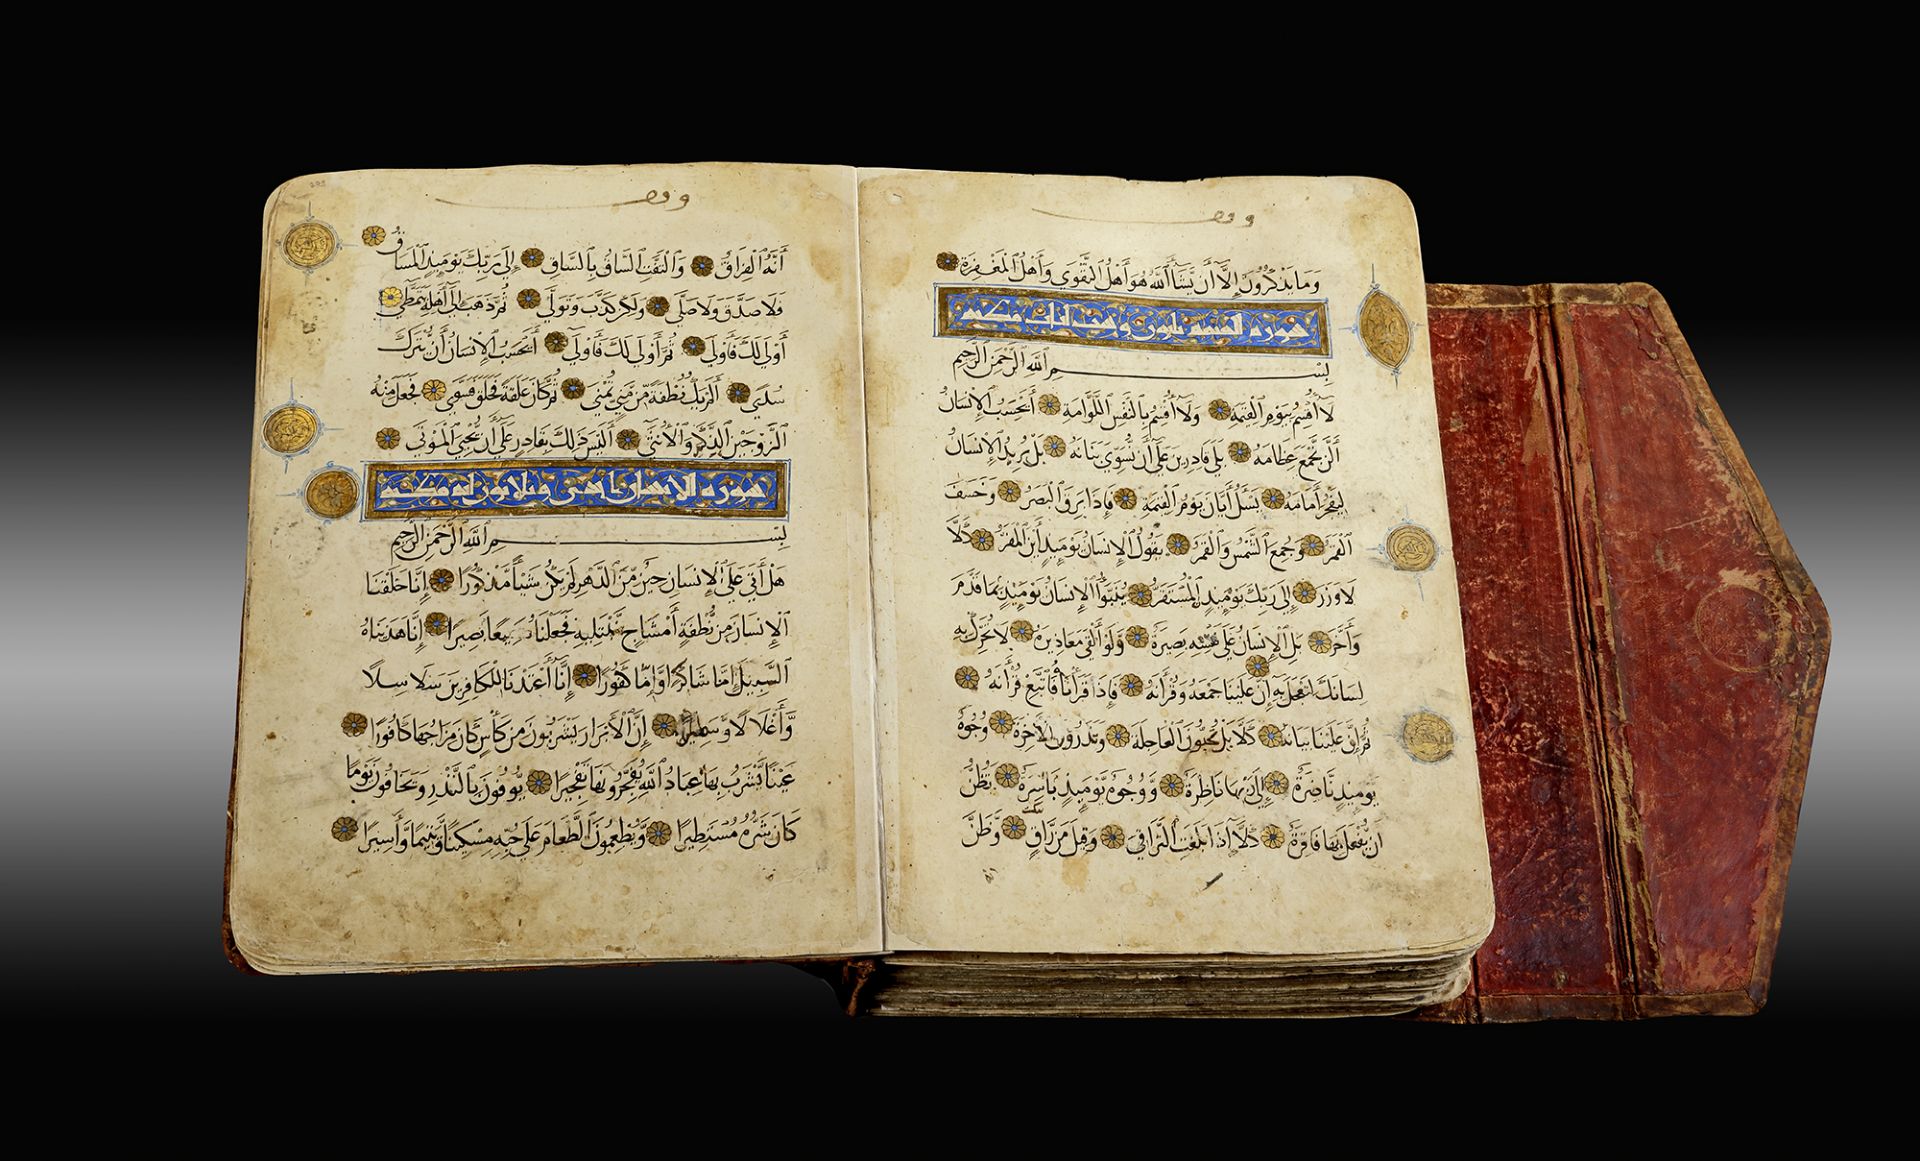 A MAMLUK QURAN (THE BAHRI DYNASTY) ATTRIBUTED TO SANDAL (ABU BAKR) SCHOOL OR STYLE, 1250-1382 AD - Image 11 of 34